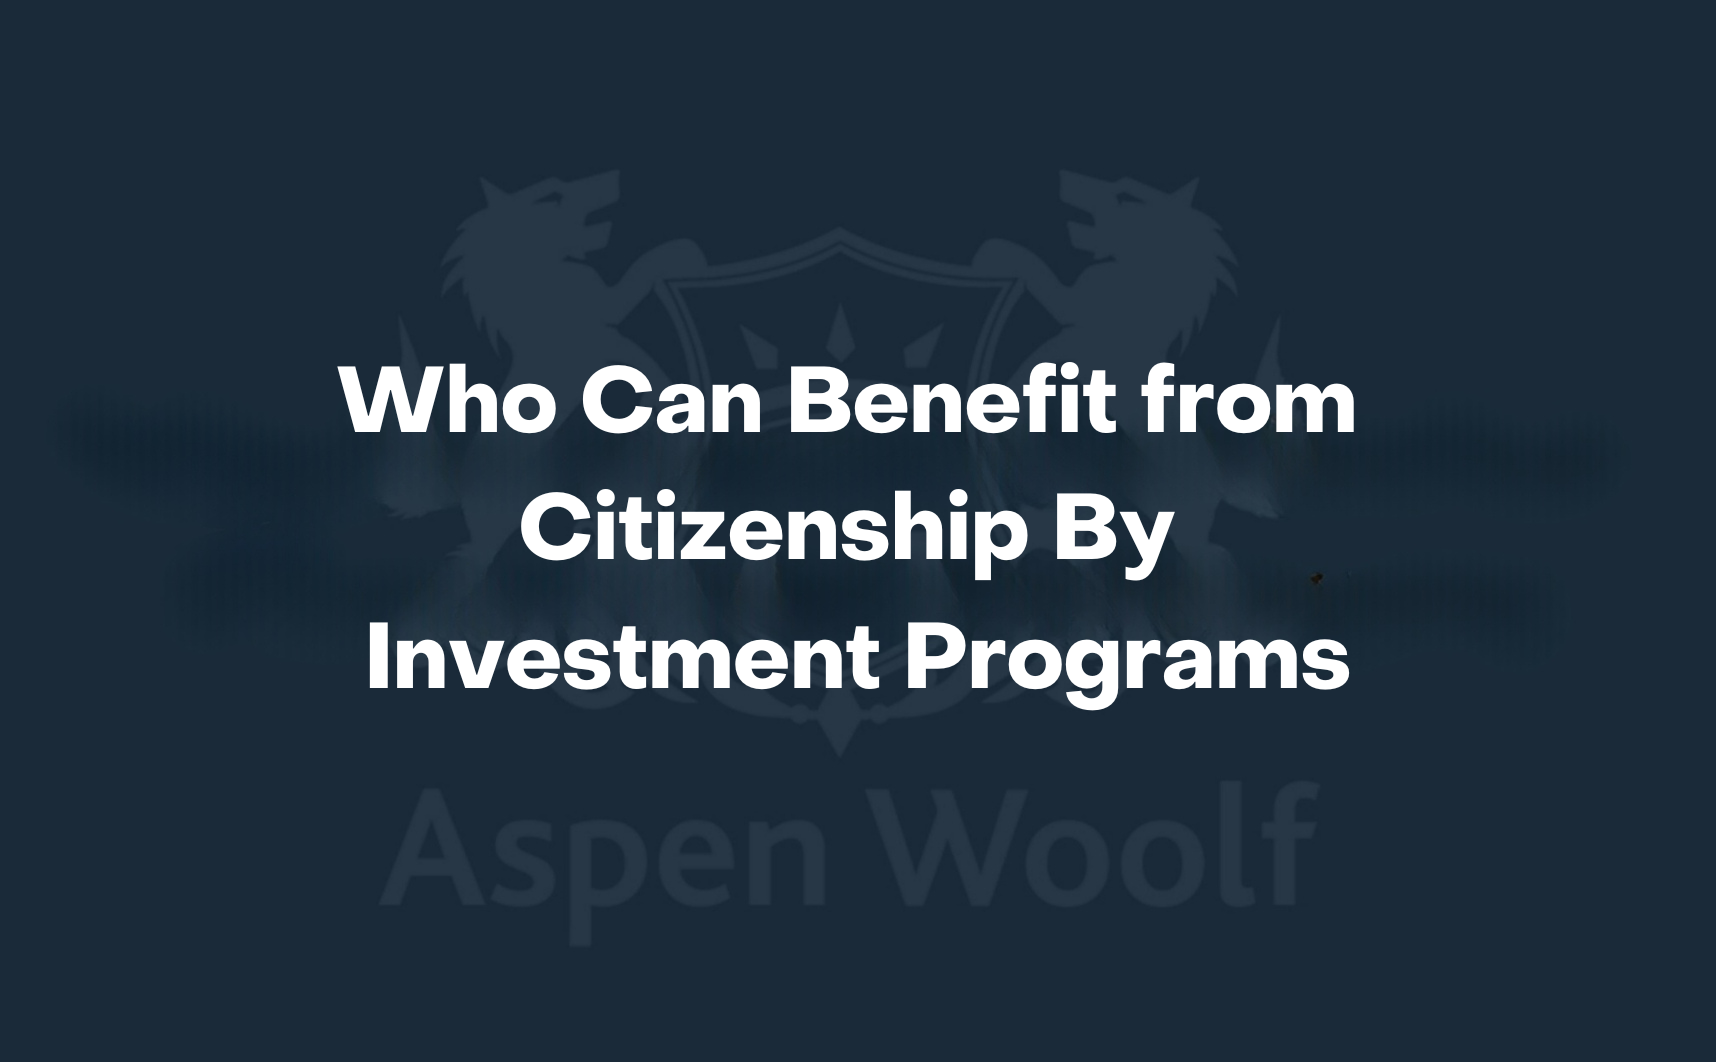 Who Can Benefit from Citizenship By Investment Programs?